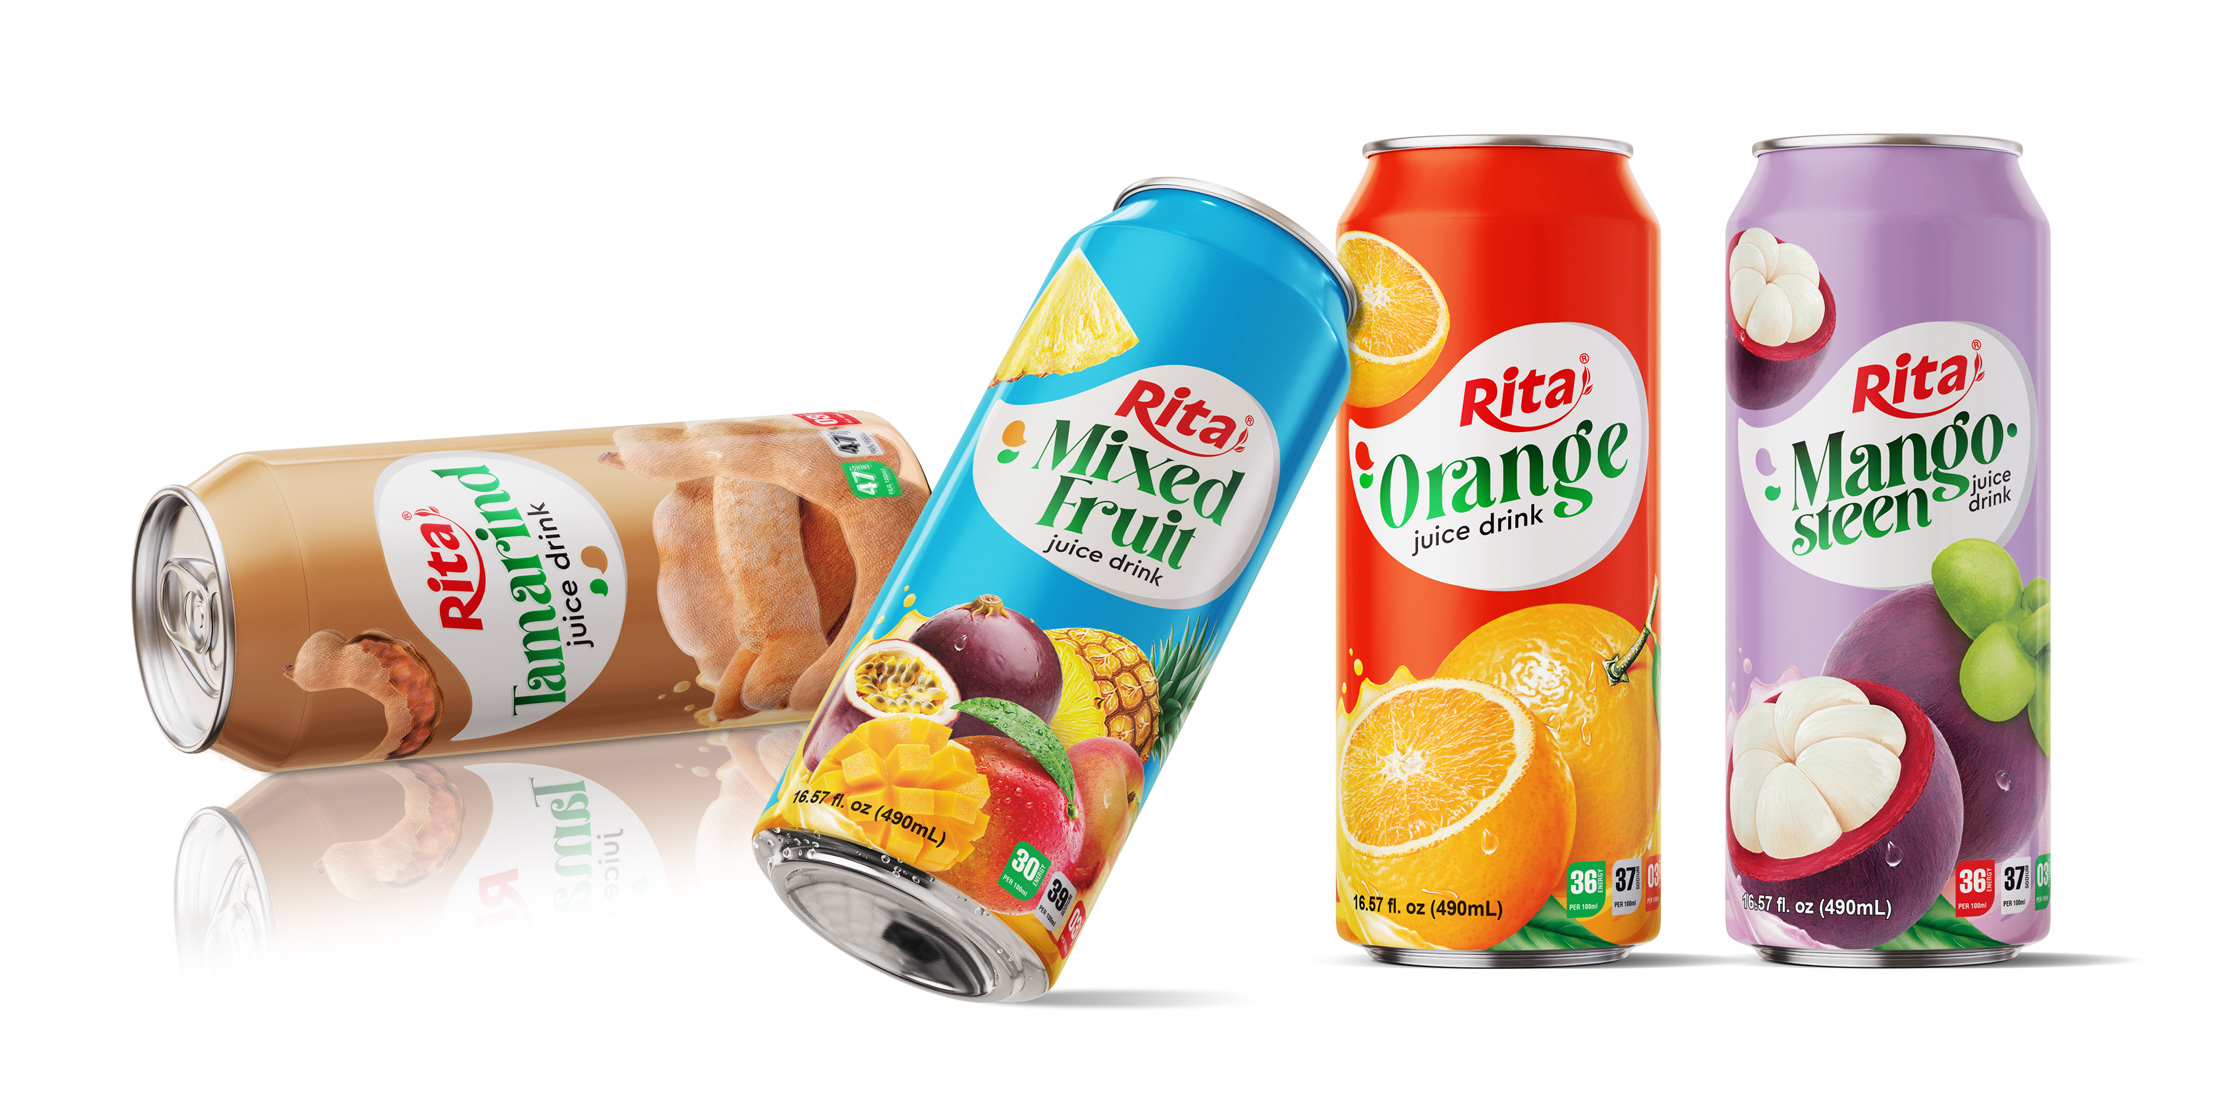 poster real tropical fruit juice drink 490ml cans 